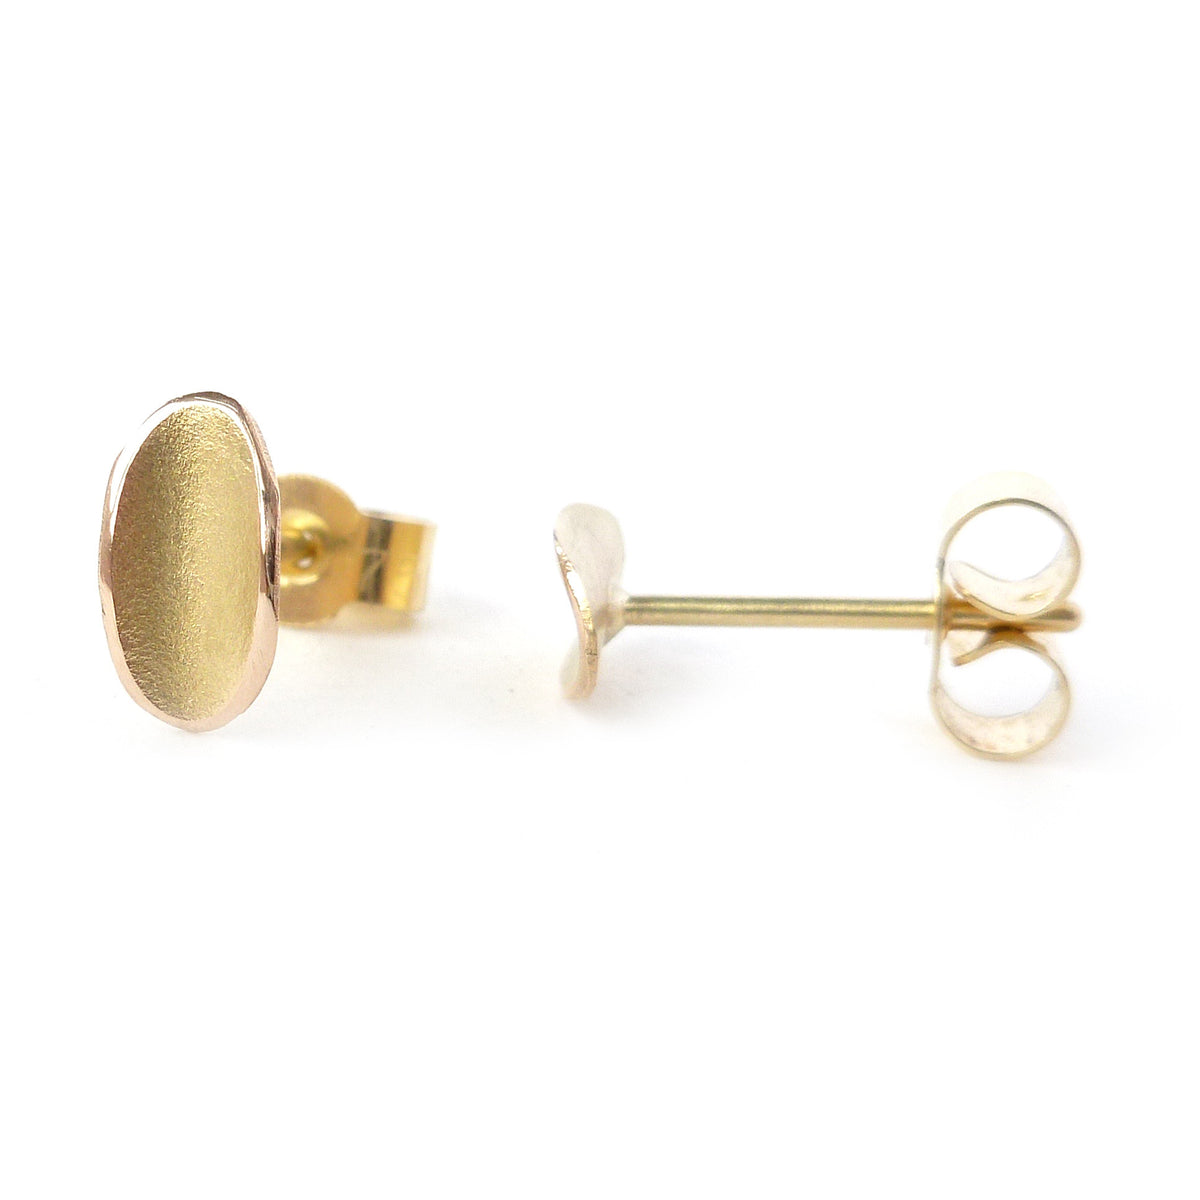 simple, small, discreet modern gold stud earrings with a unique touch. Handmade by Sue Lane Contemporary Jewellery